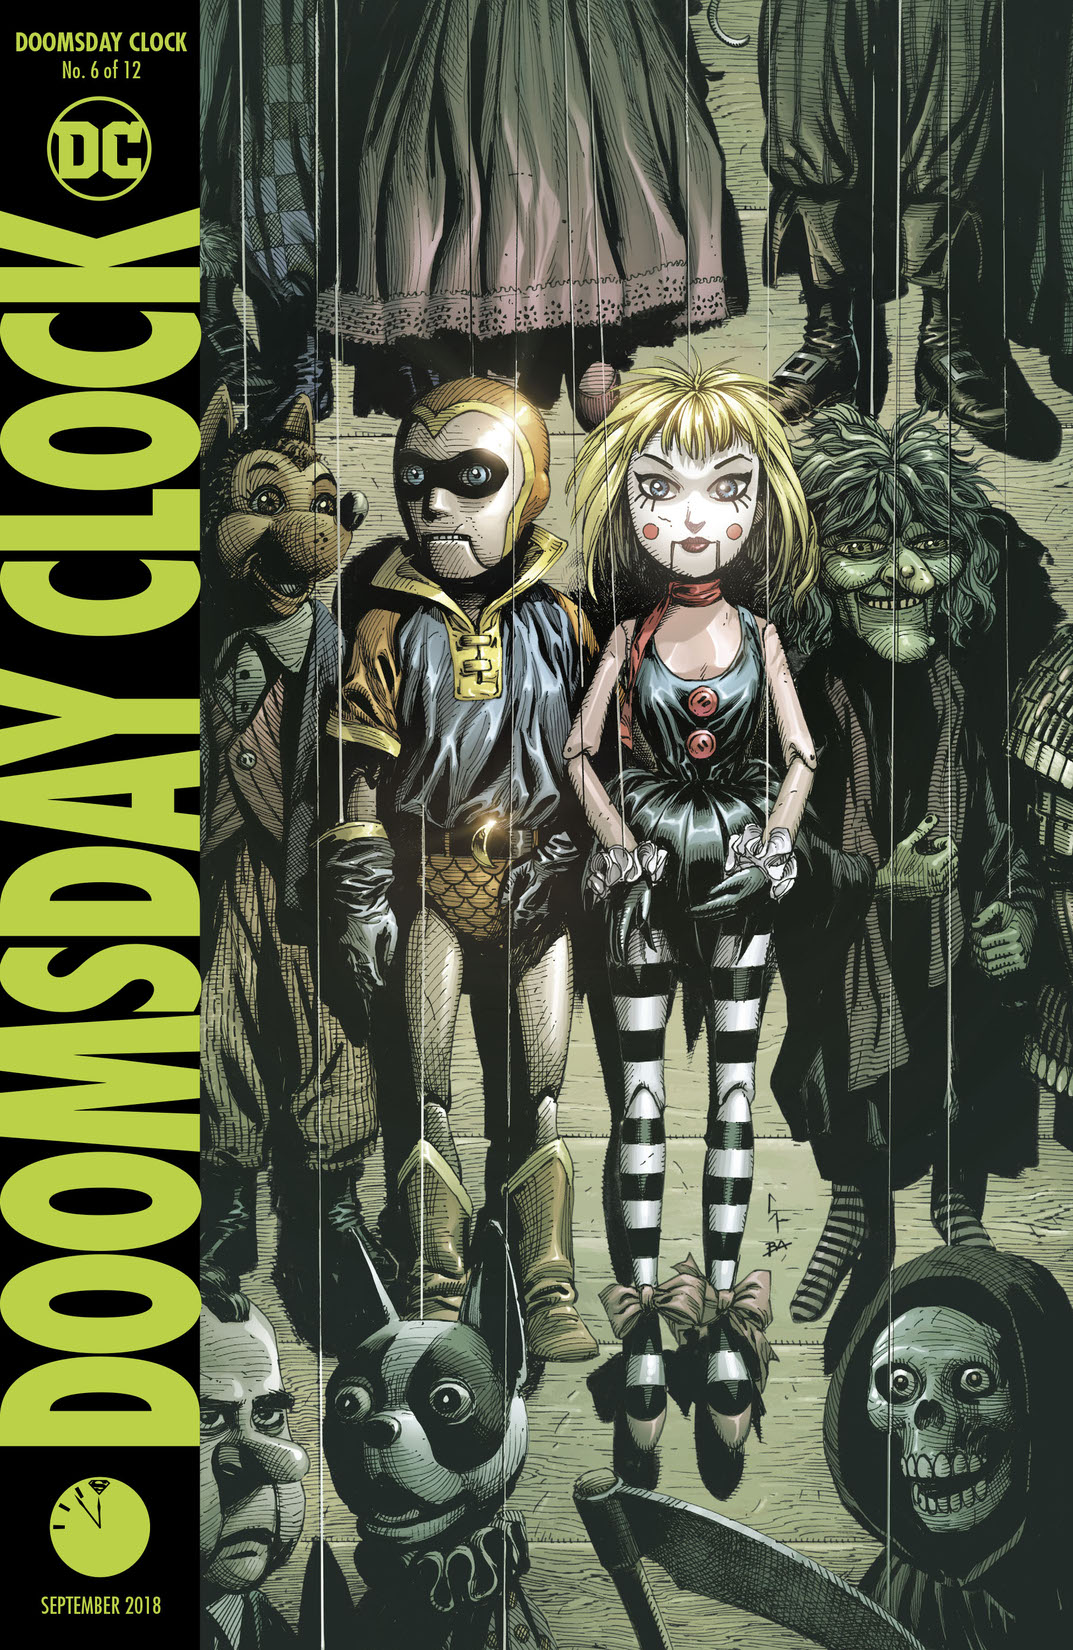 Doomsday Clock #6 preview images